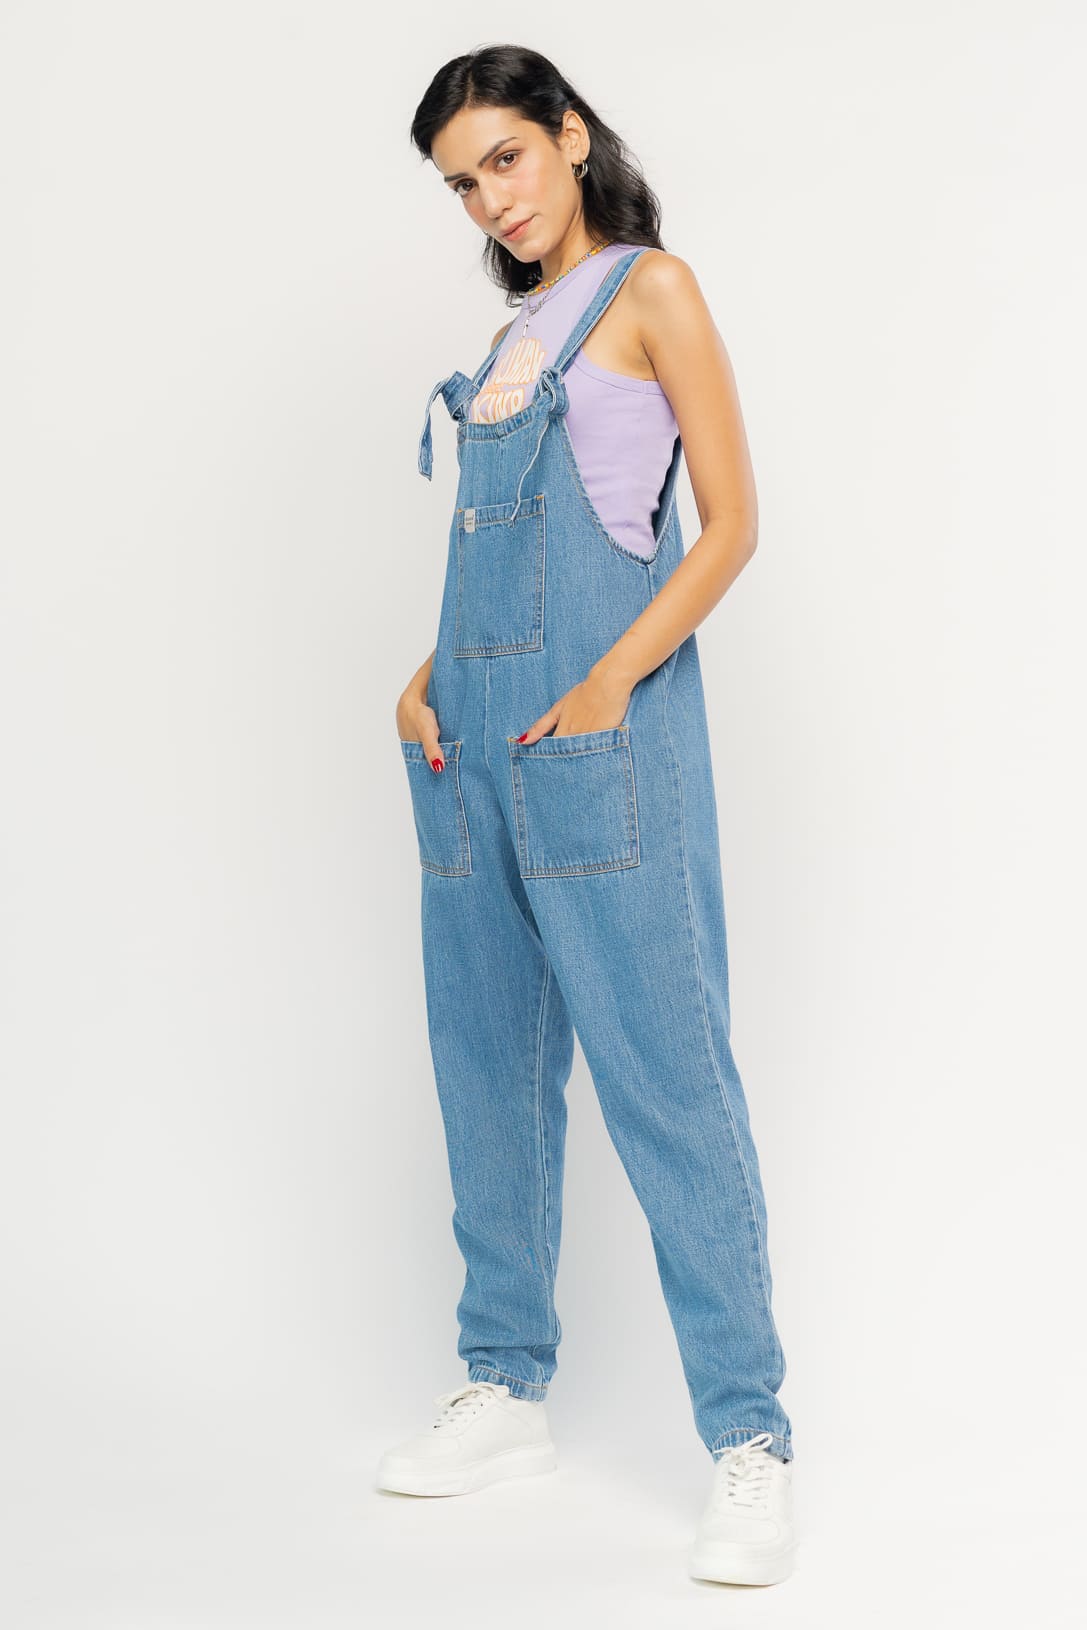 Buy ZORKH - Fashion on you Girls Cotton Top and Denim Dungaree Set (12-18  Months, Blue_Capri_Dungaree) at Amazon.in